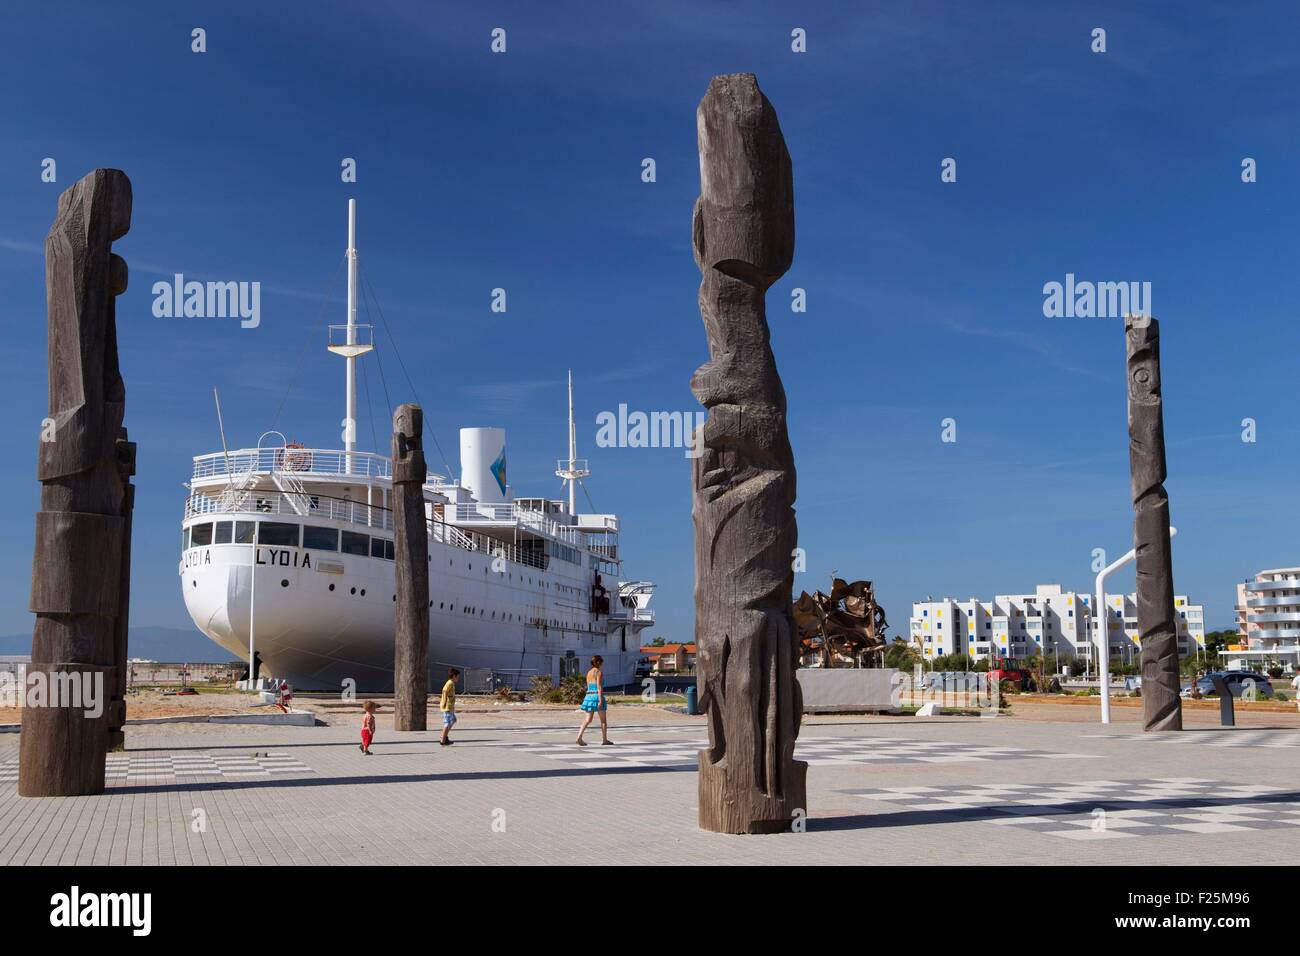 France, Pyrenees Orientales , Port Barcares, Lydia casino in a failed passenger ship and Totem au soleil by Sculptor Pierre Moreels Stock Photo